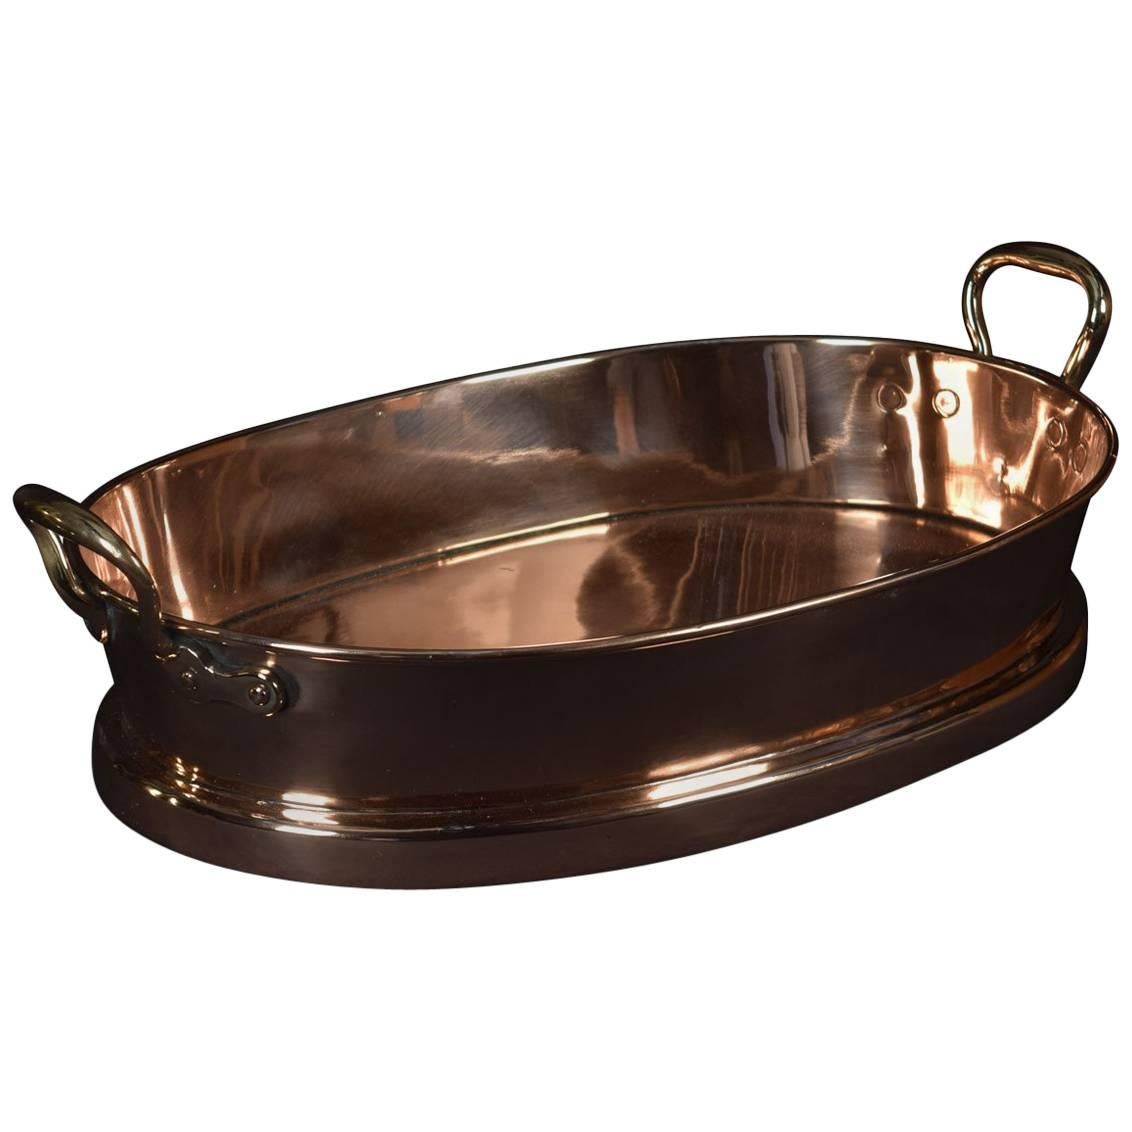 Large Heavy Copper Oval Baking Dish, Saute Pan or Paella Dish